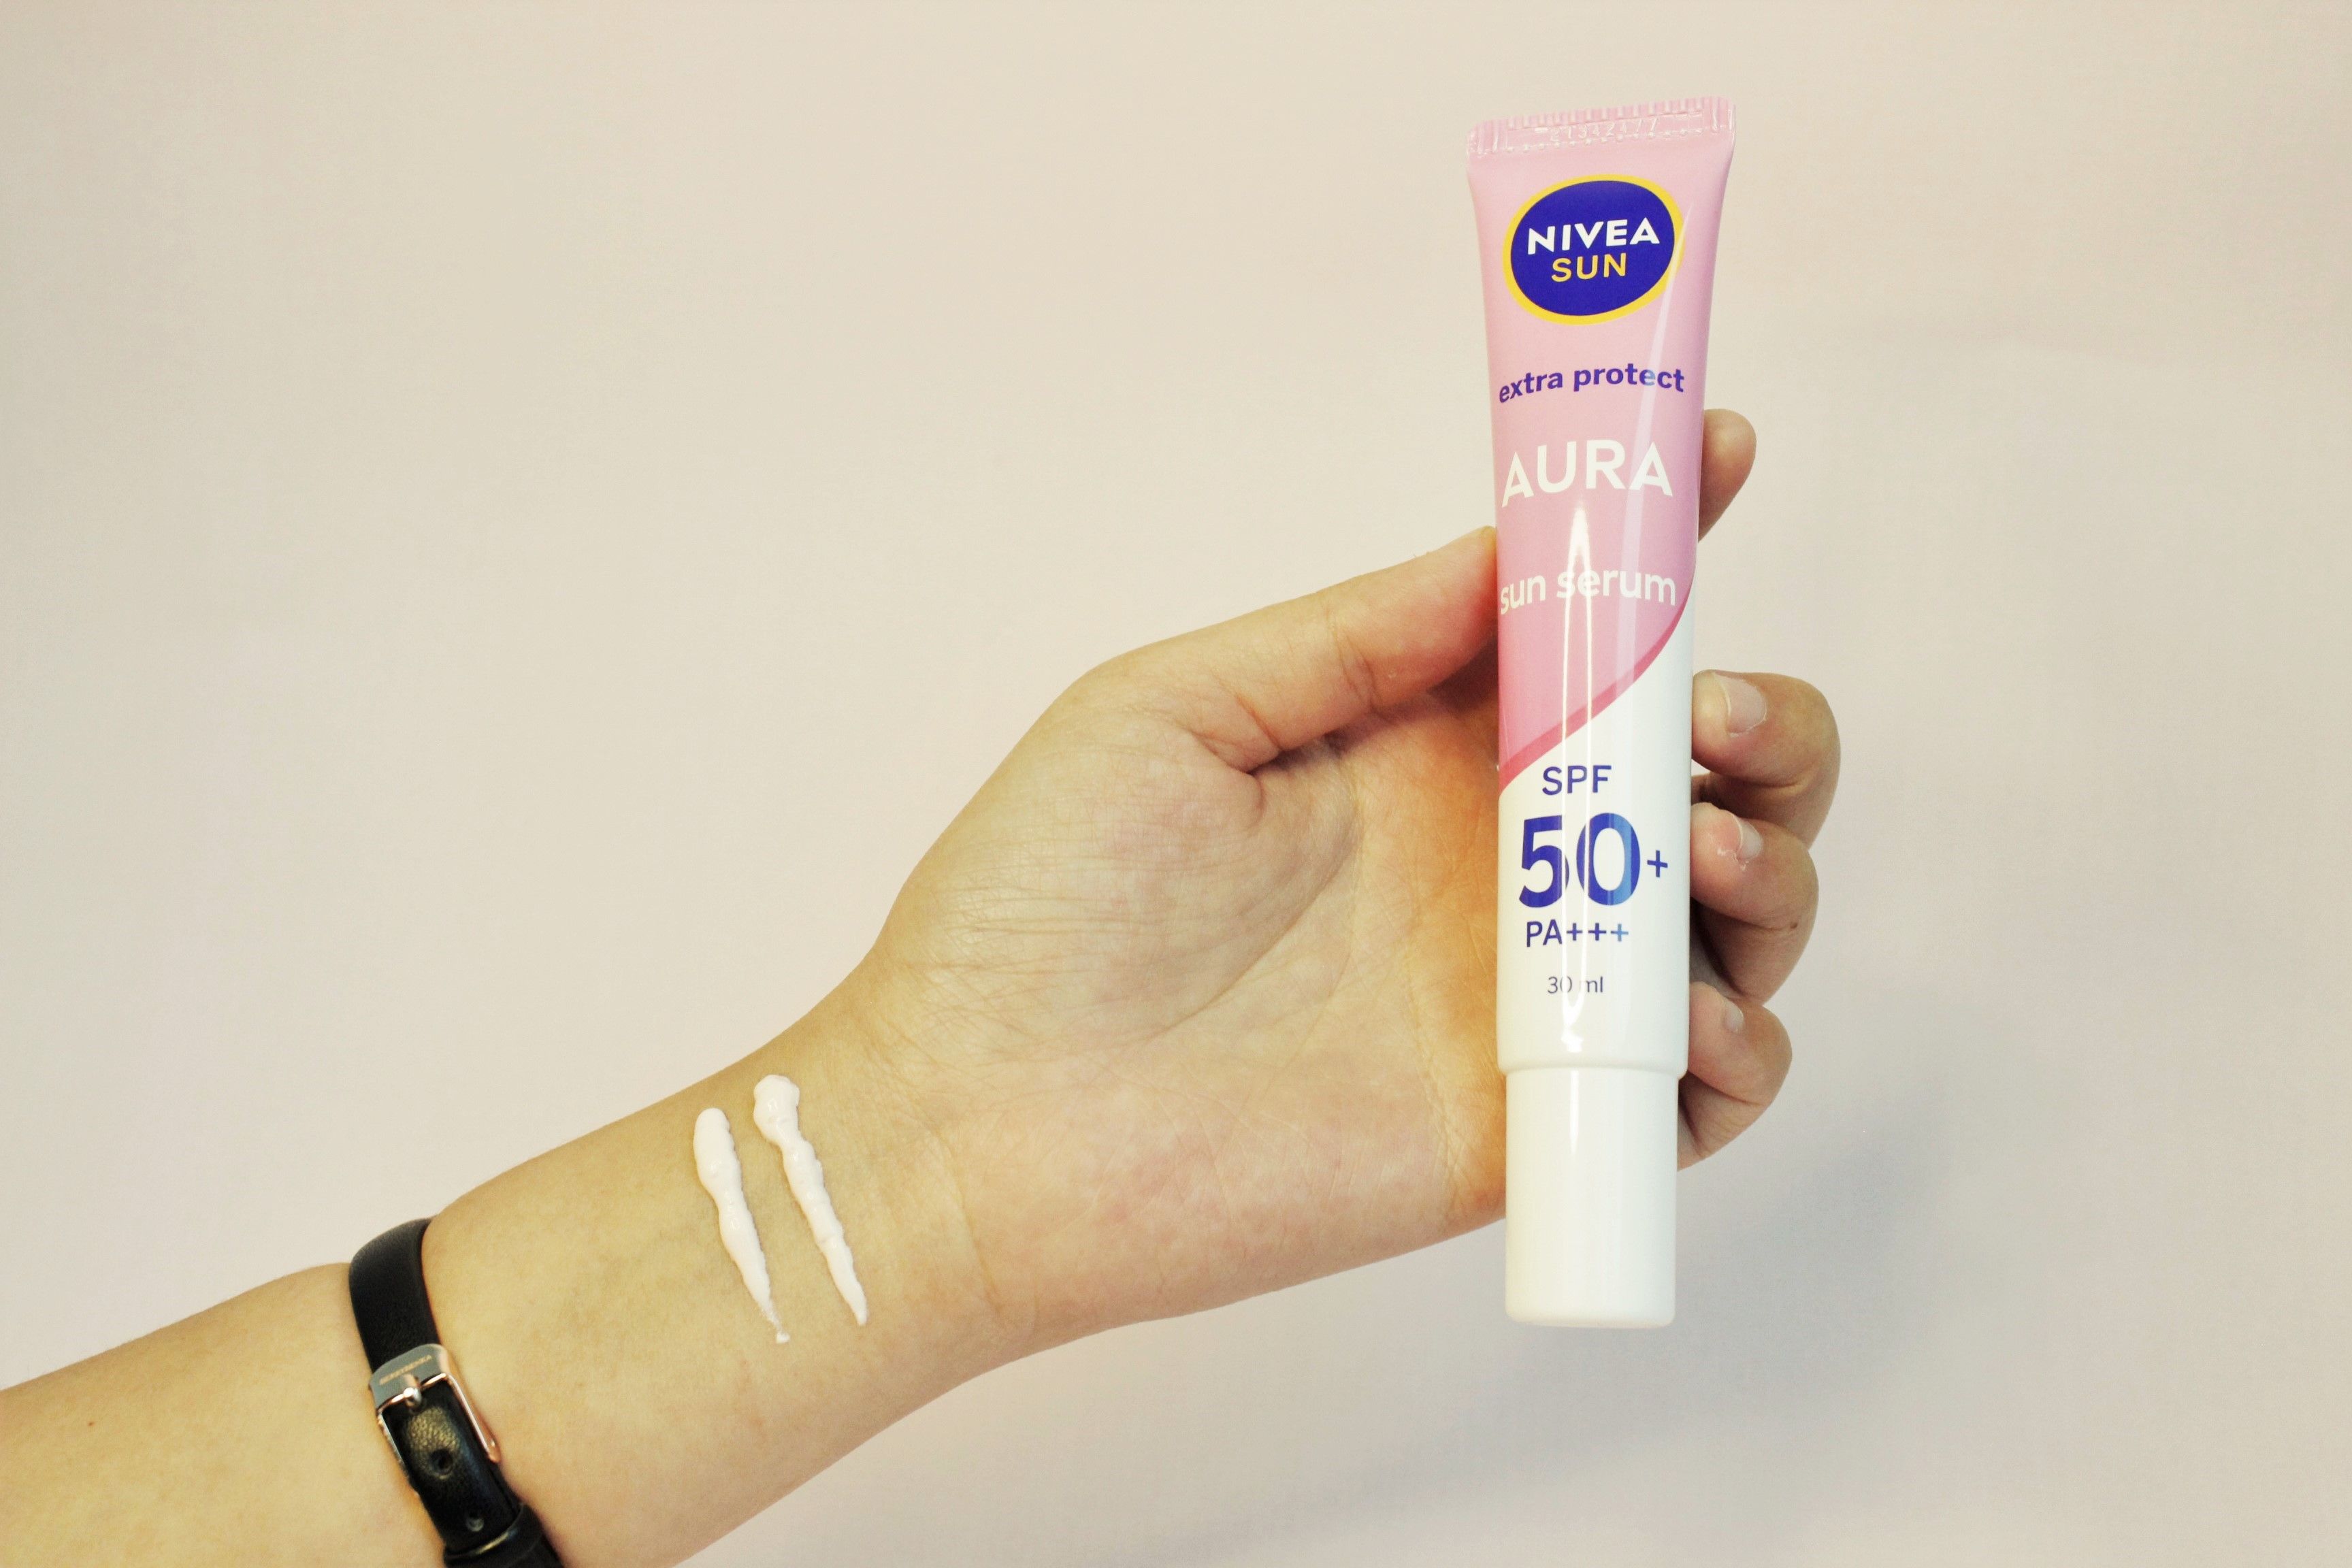 Bright Face & Protection, These are the 4 benefits of NiveA Sun Face Treatment